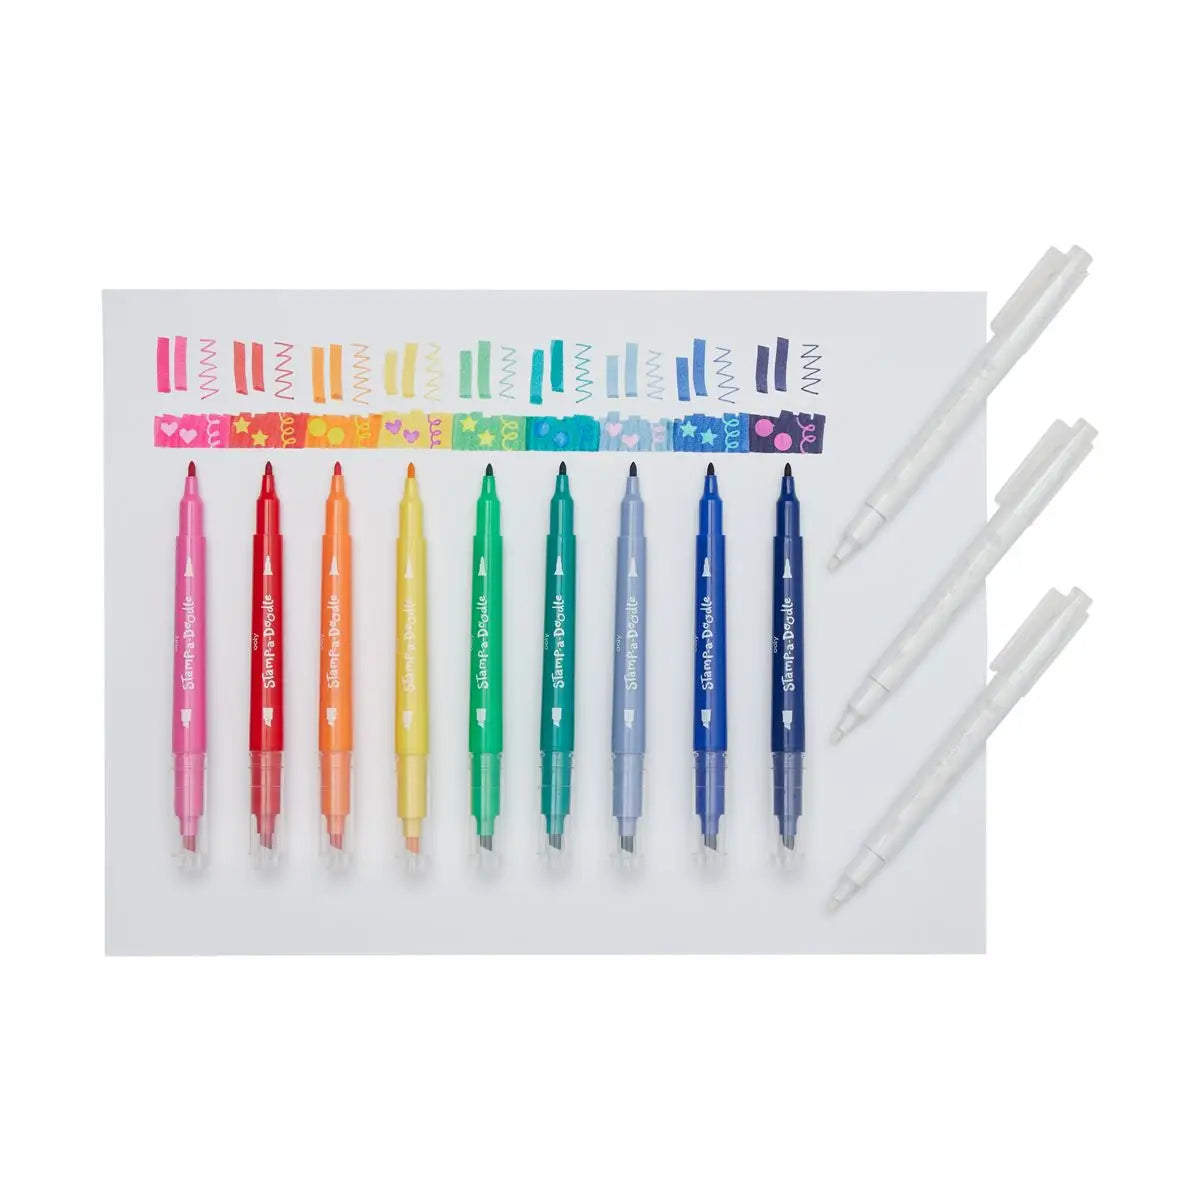 Stamp-A-Doodle Double-Ended Markets - Set of 12